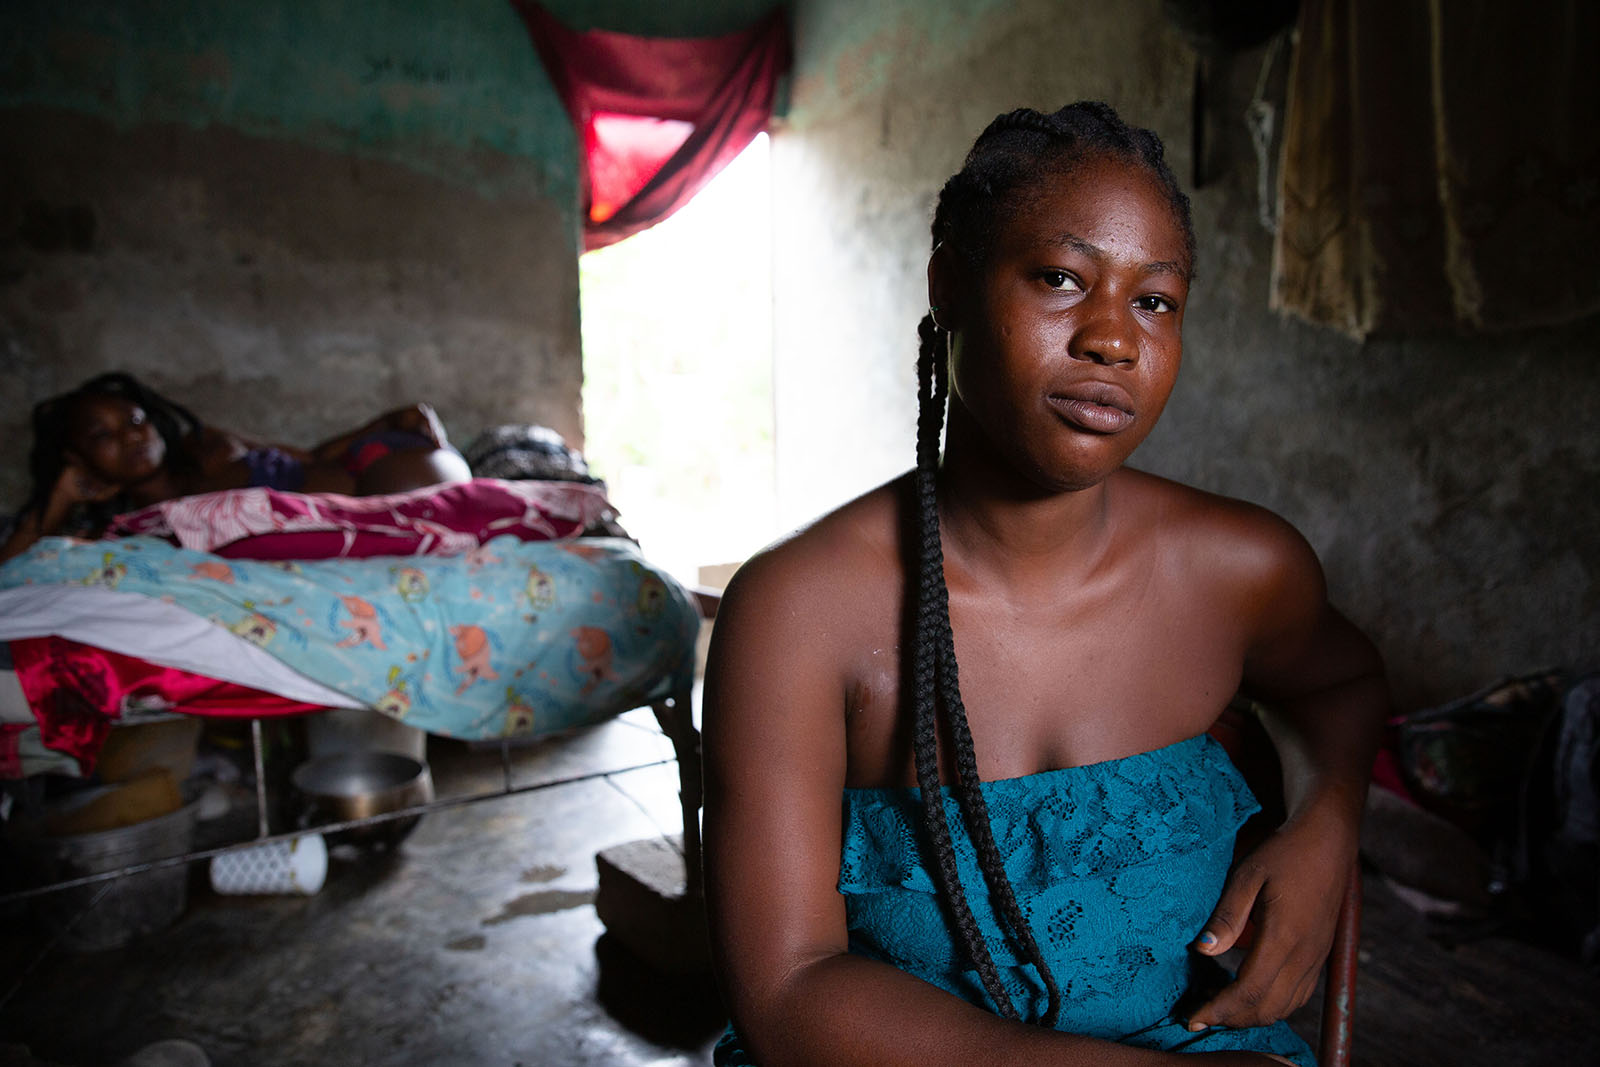 Brunia Benjamin, a participant in the USAID-funded Manje Pi Byen program, at her home in Cité Soleil, Port-au-Prince, Haiti. (Photo: Kieran McConville/Concern Worldwide)